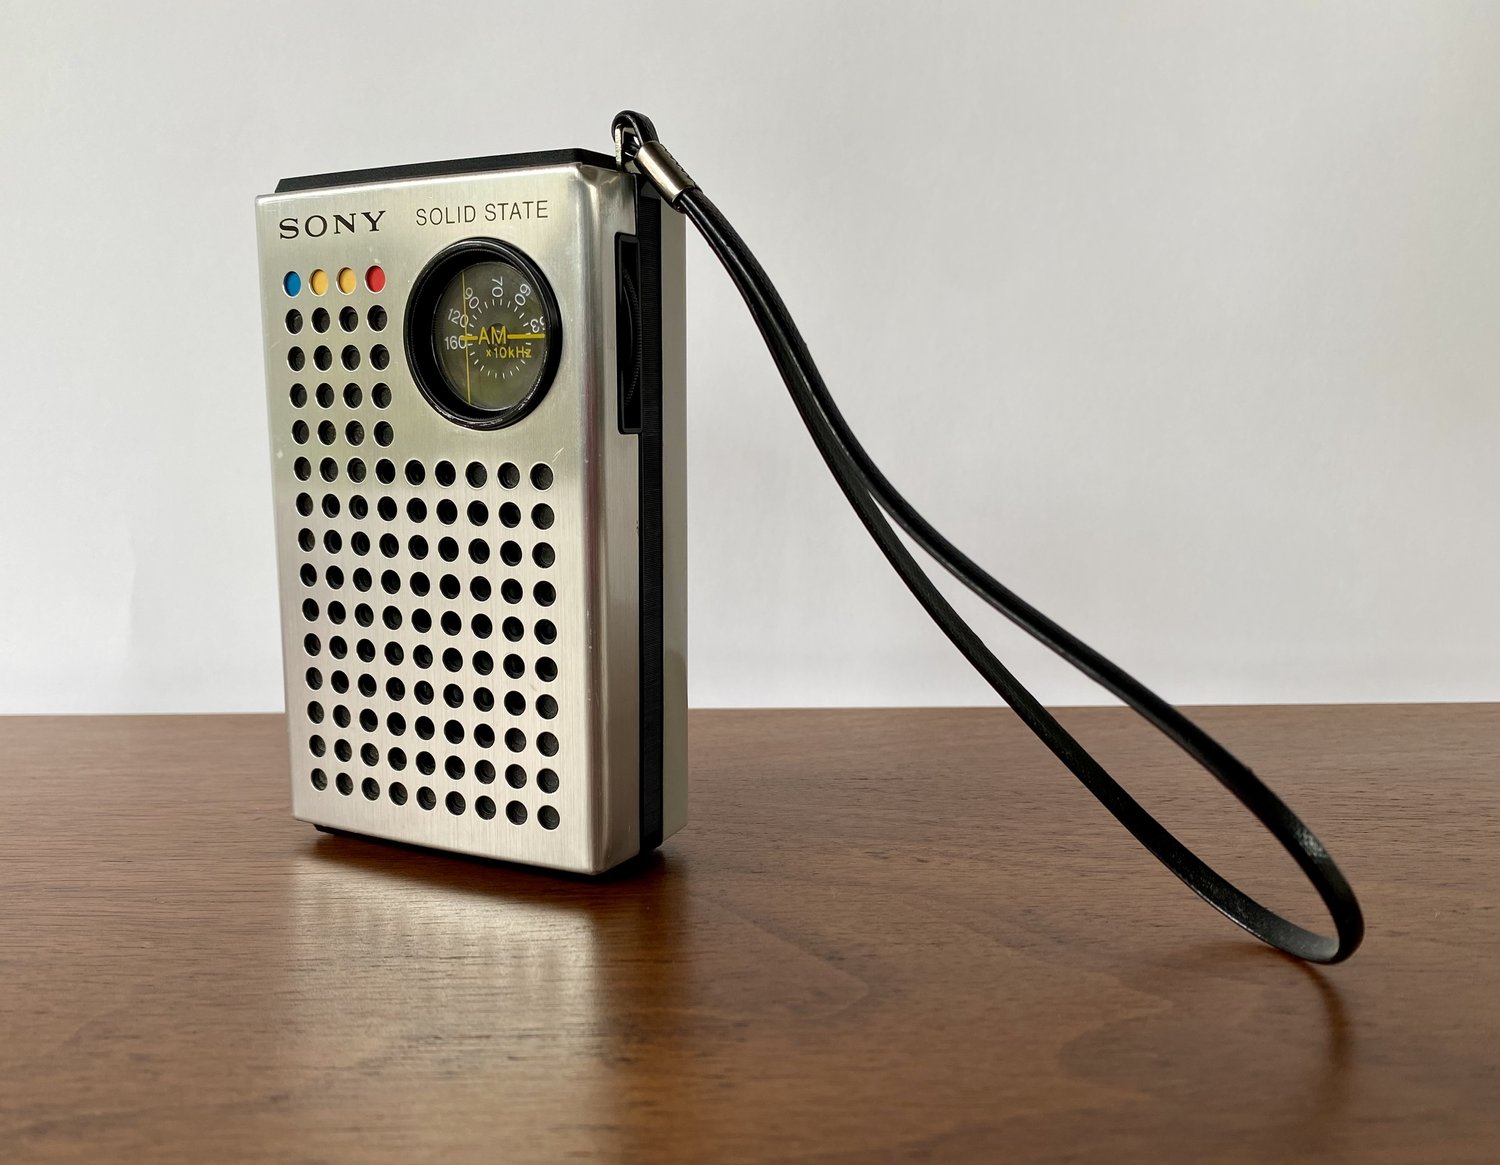 Sony Solid State AM Transistor Radio — Mid-Century Modern Finds